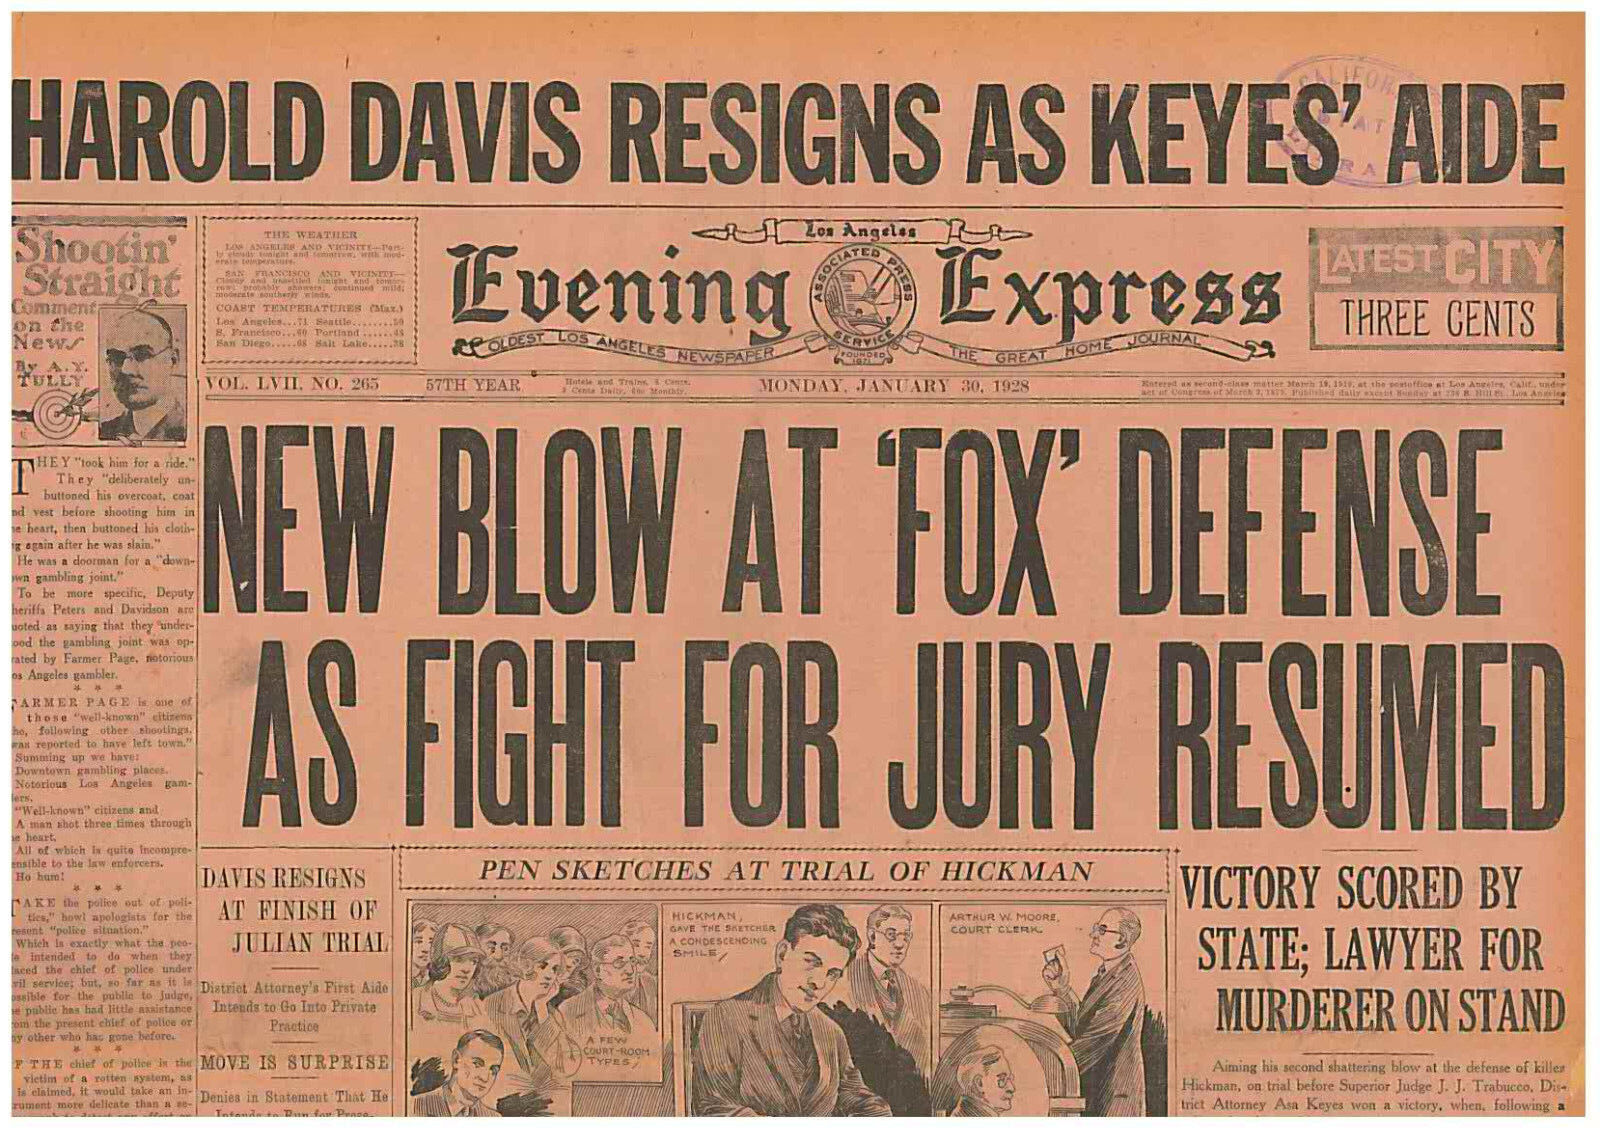 KILLER HICKMAN TRIAL FIGHT OVER JURY JANUARY 30 1928 CRIME NEWSPAPER 0302130WQ